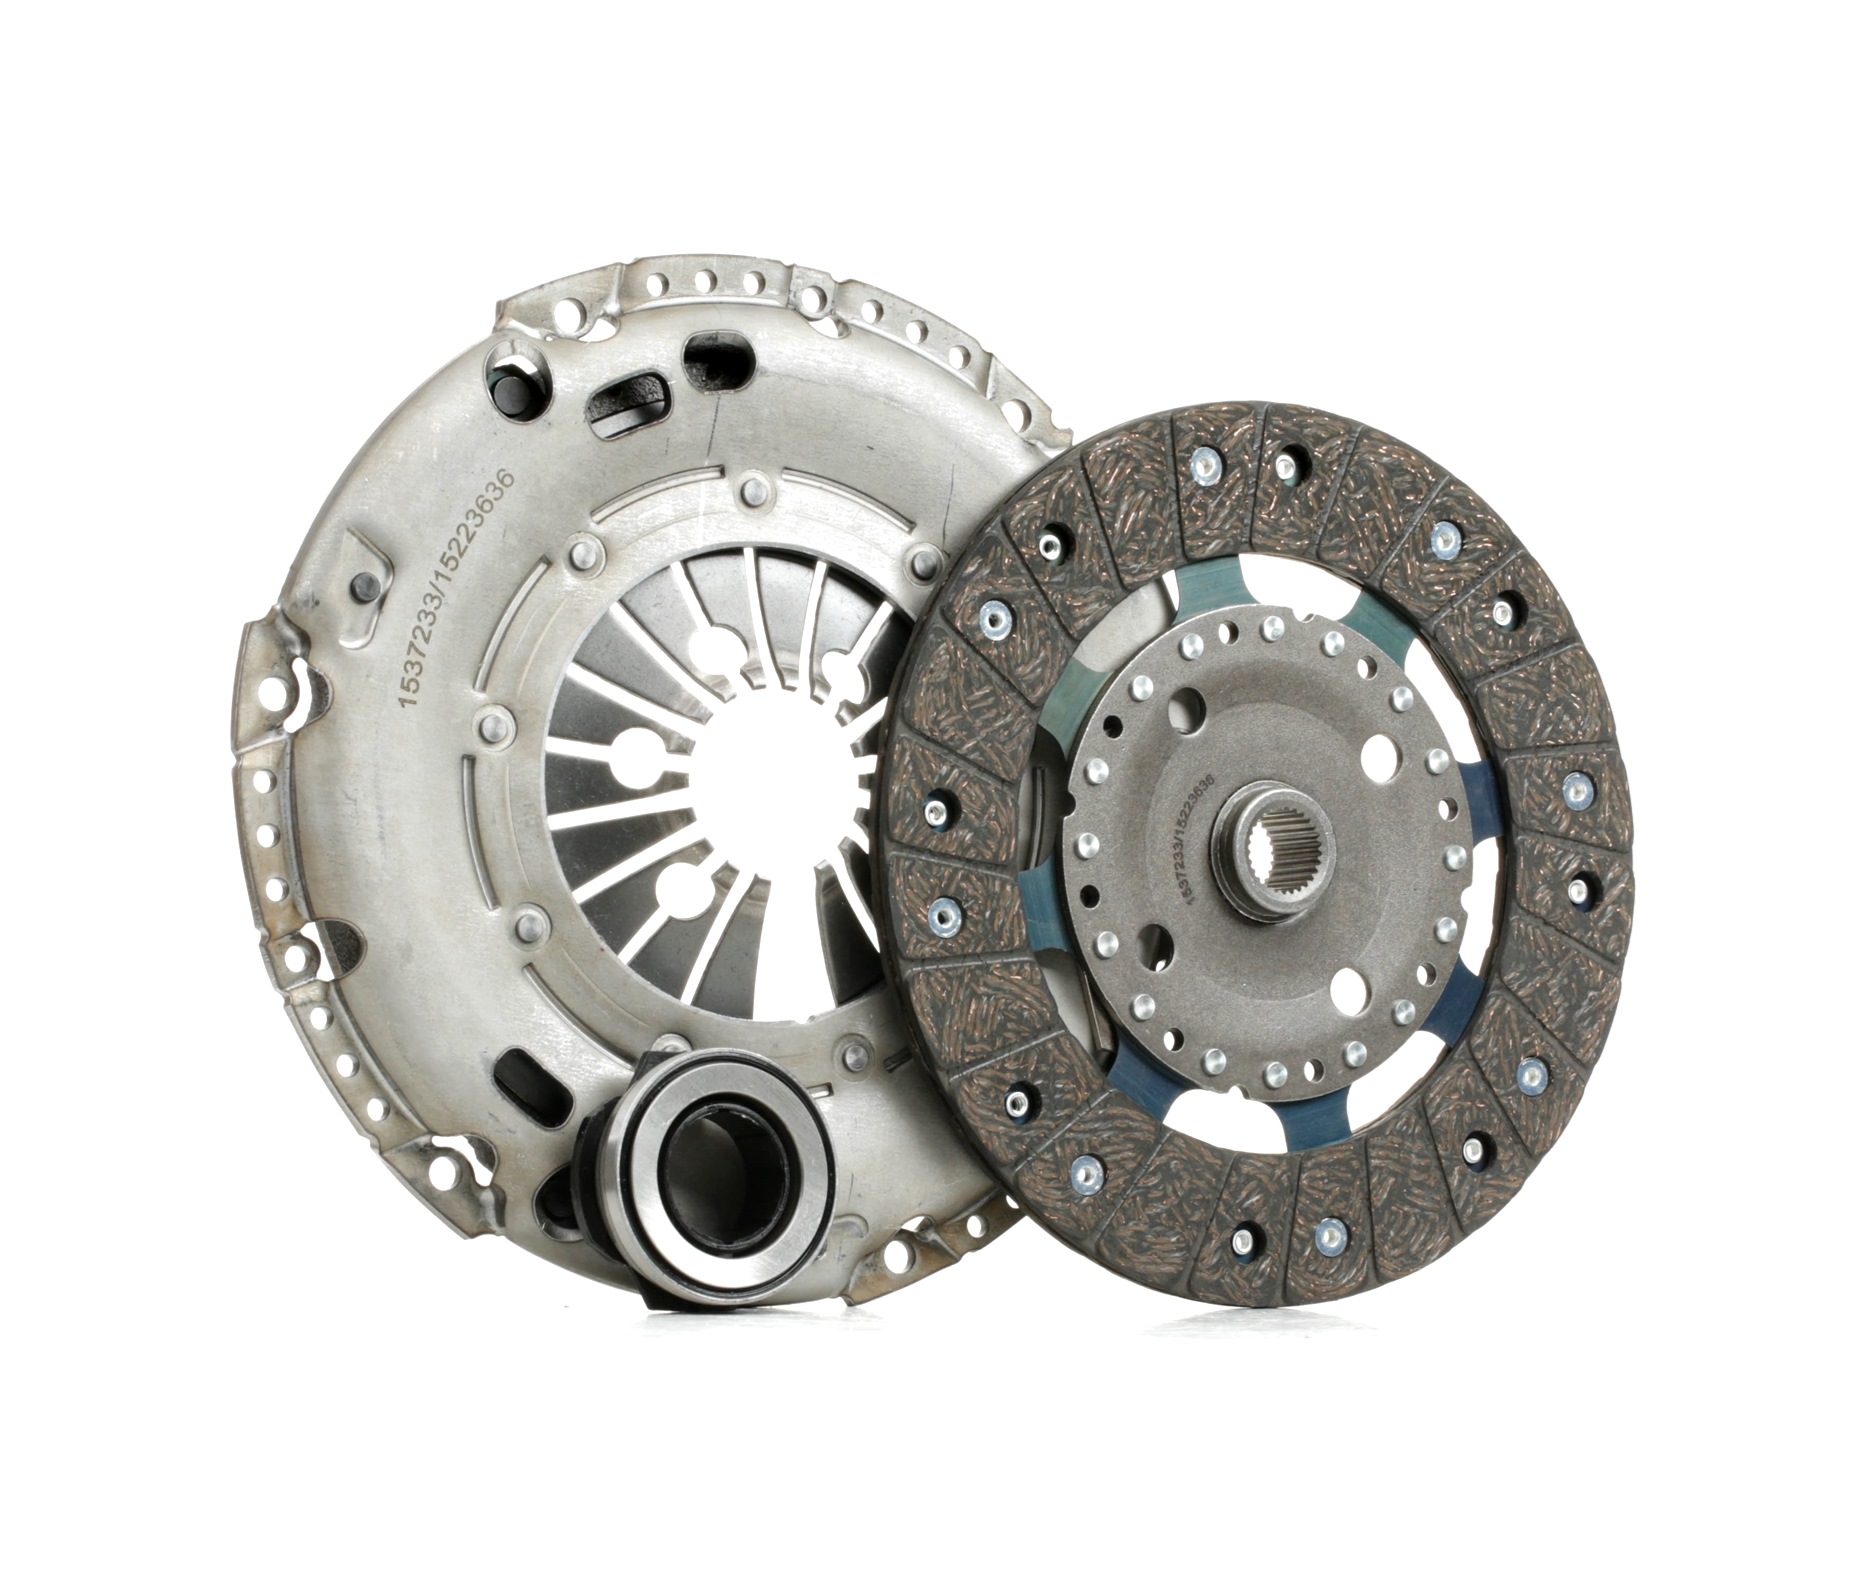 RIDEX 479C0431 Clutch kit for engines with dual-mass flywheel, with clutch release bearing, with clutch disc, Check and replace dual-mass flywheel if necessary., 230mm